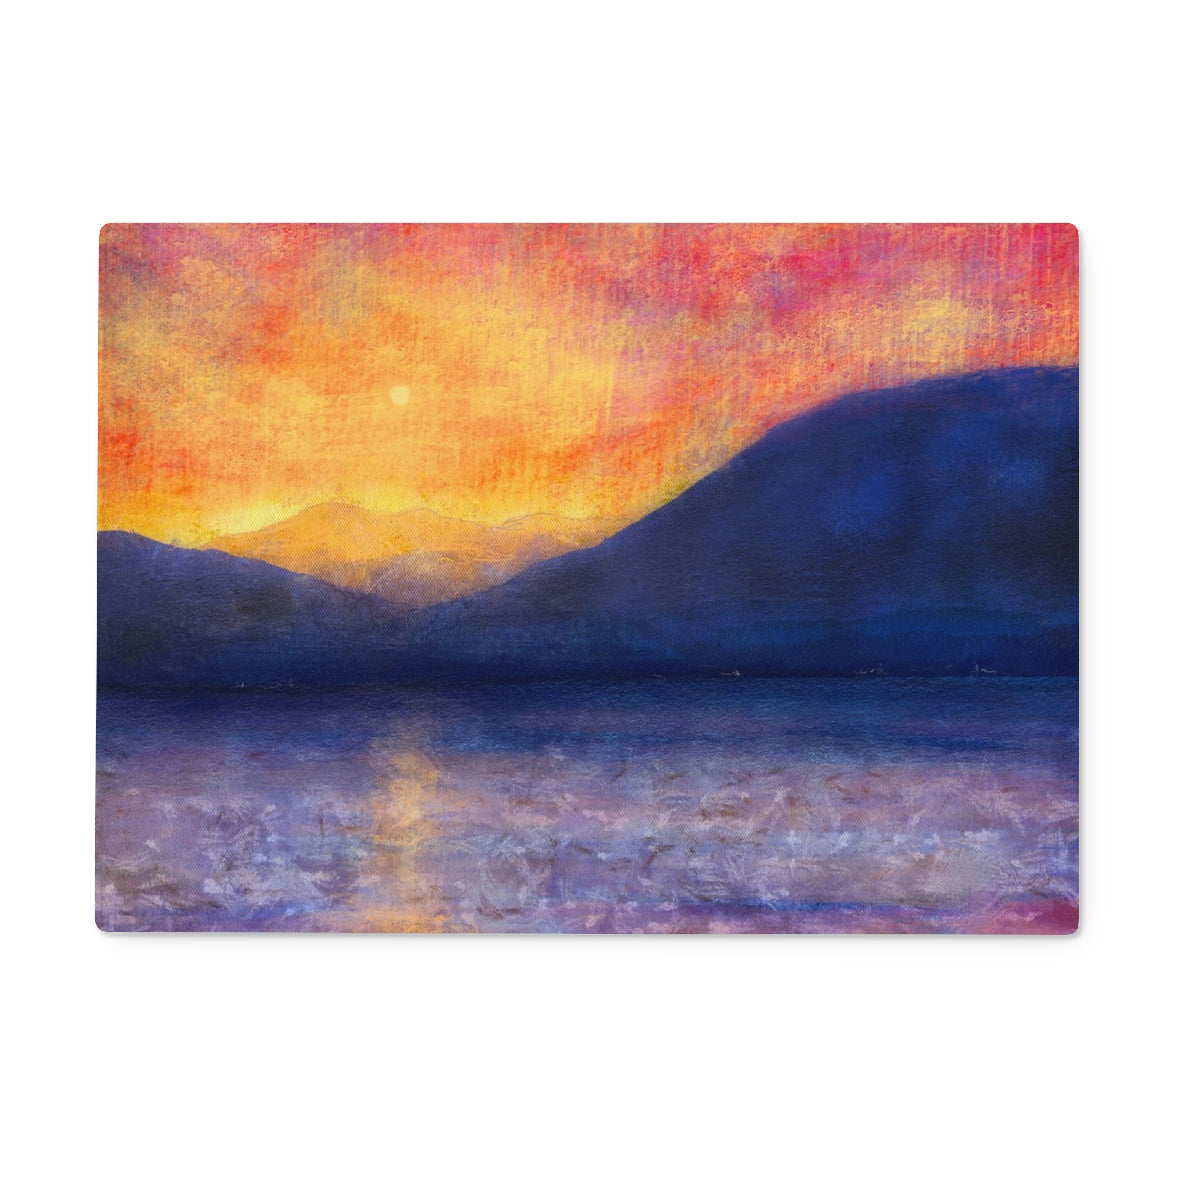 Sunset Approaching Mull Art Gifts Glass Chopping Board-Glass Chopping Boards-Hebridean Islands Art Gallery-15"x11" Rectangular-Paintings, Prints, Homeware, Art Gifts From Scotland By Scottish Artist Kevin Hunter